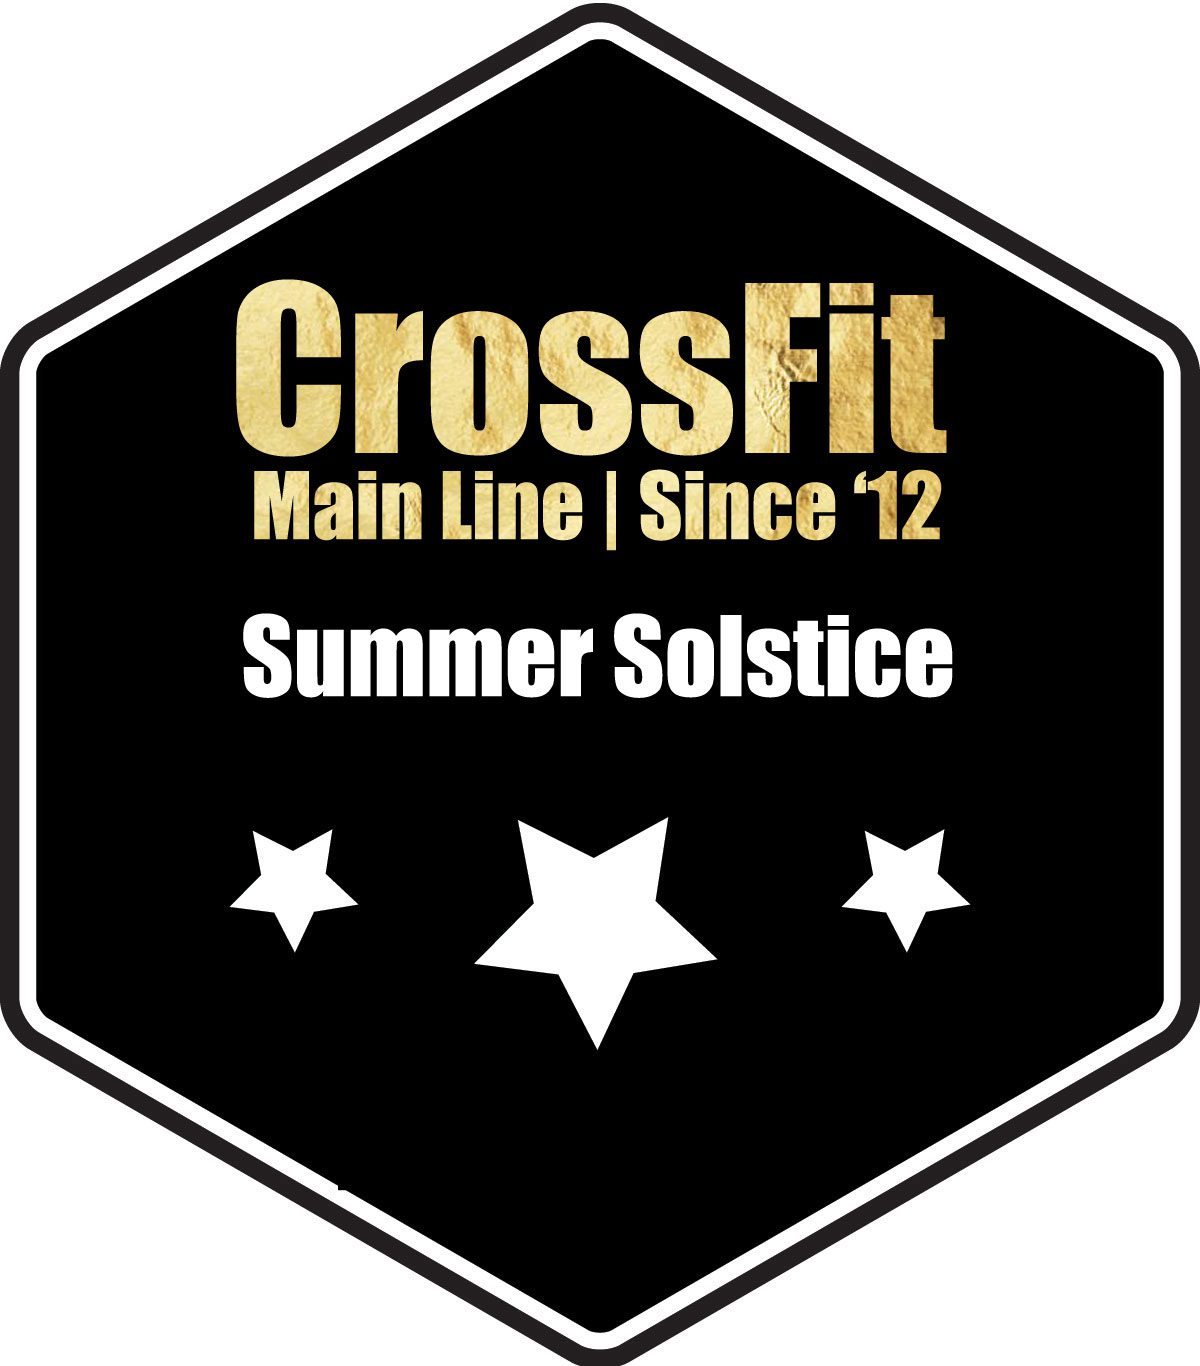 Tuesday 6.25.19 CrossFit